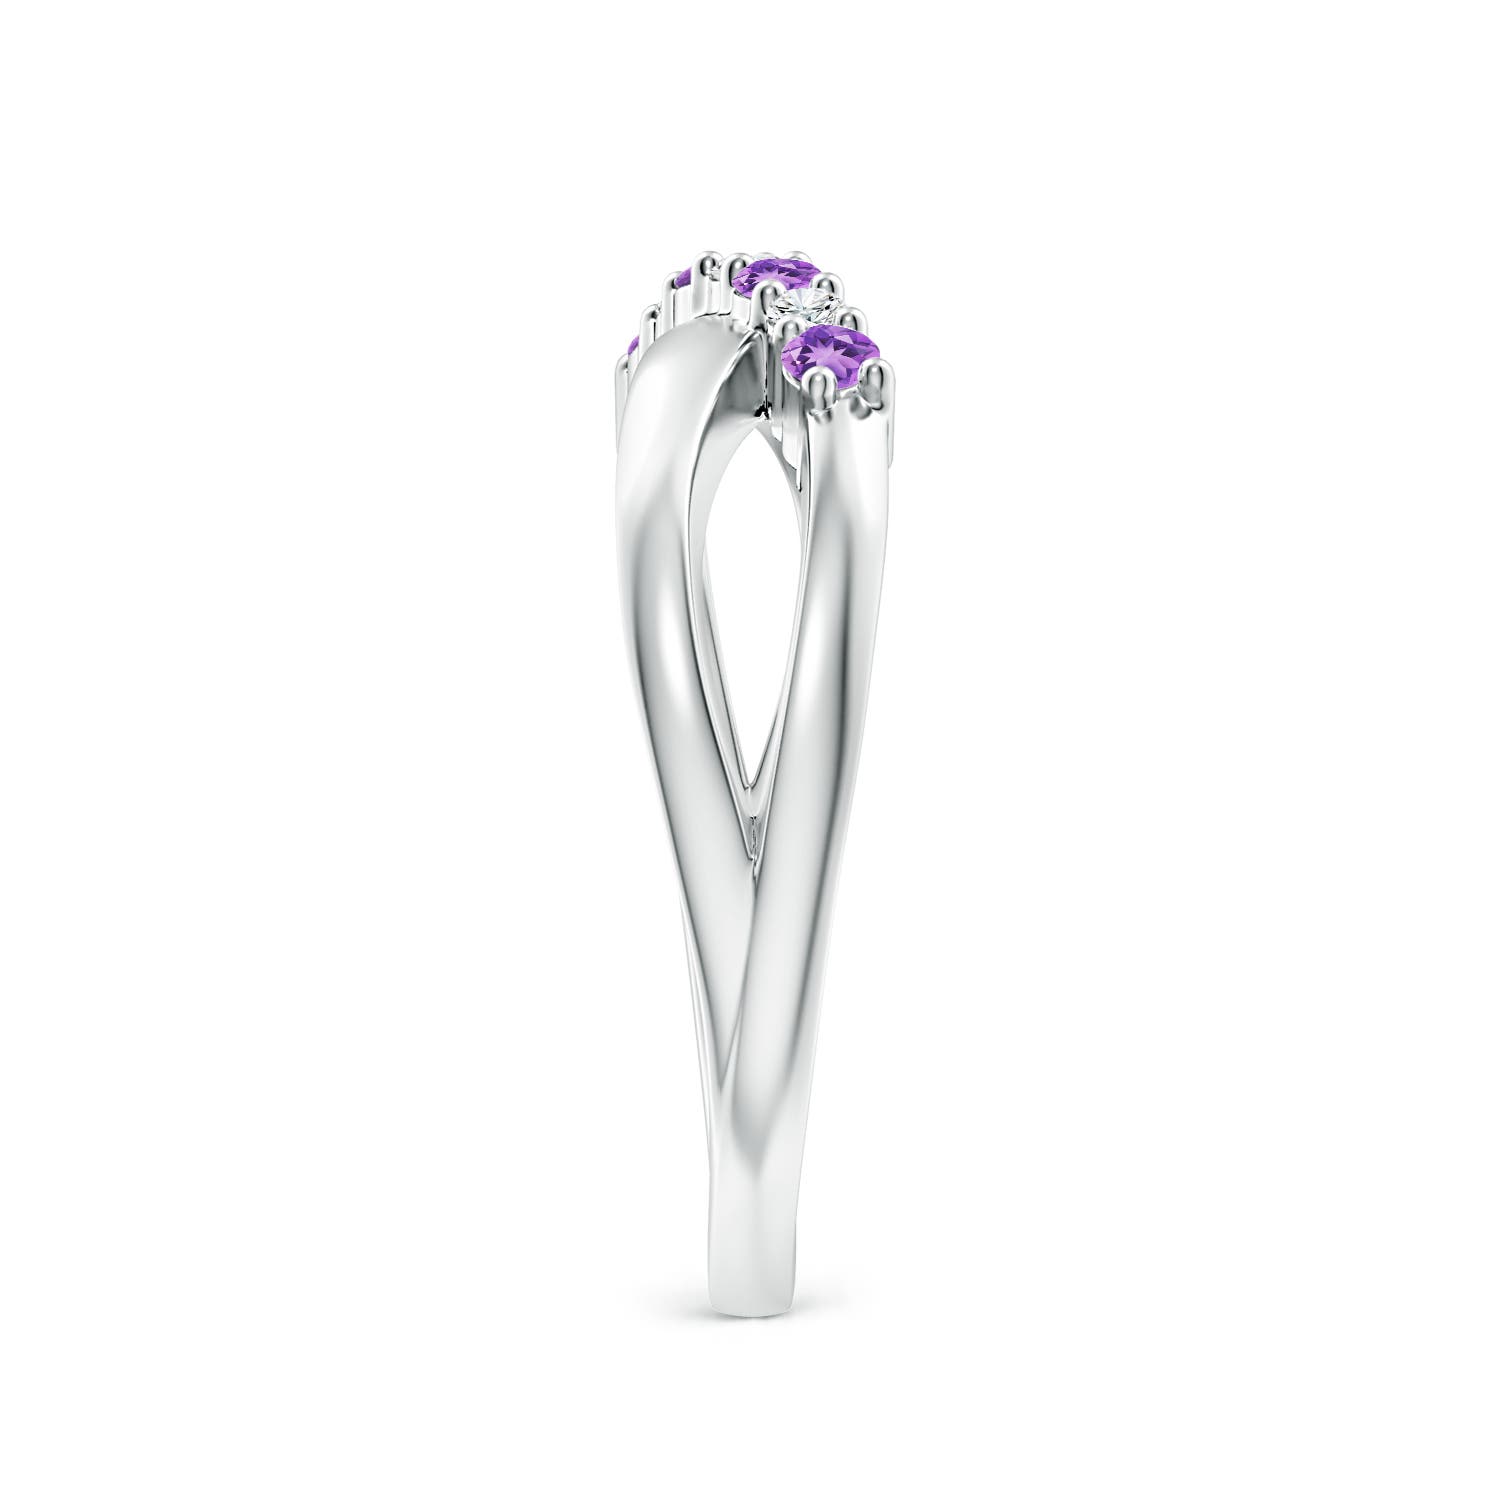 A - Amethyst / 0.18 CT / 14 KT White Gold